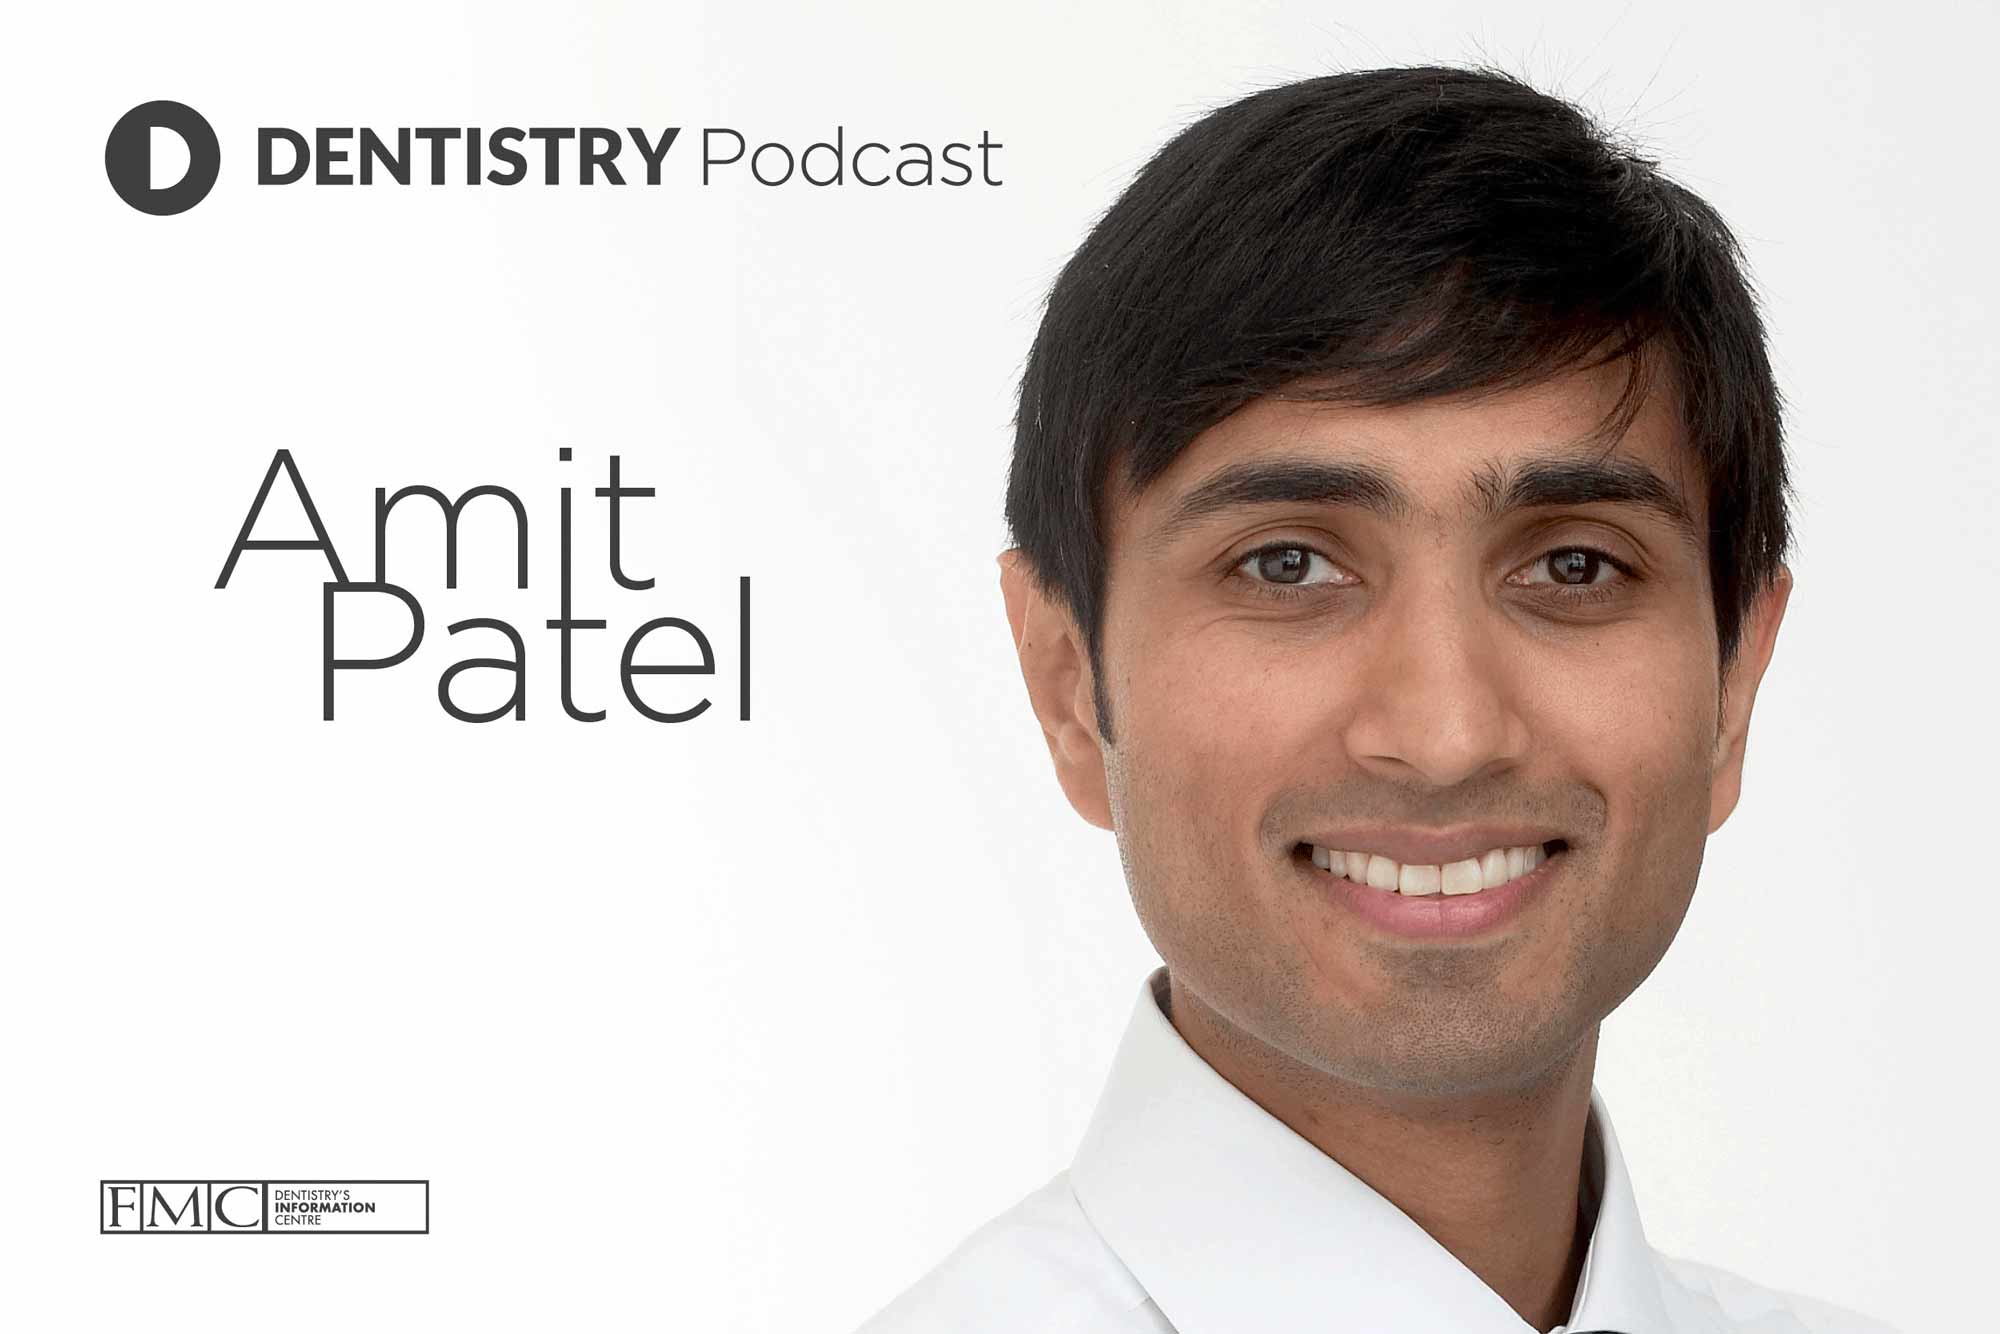 Amit Patel talks to Dentistry Online about his path into dentistry, how he fell into periodontics and his mission to overcome his fear of heights